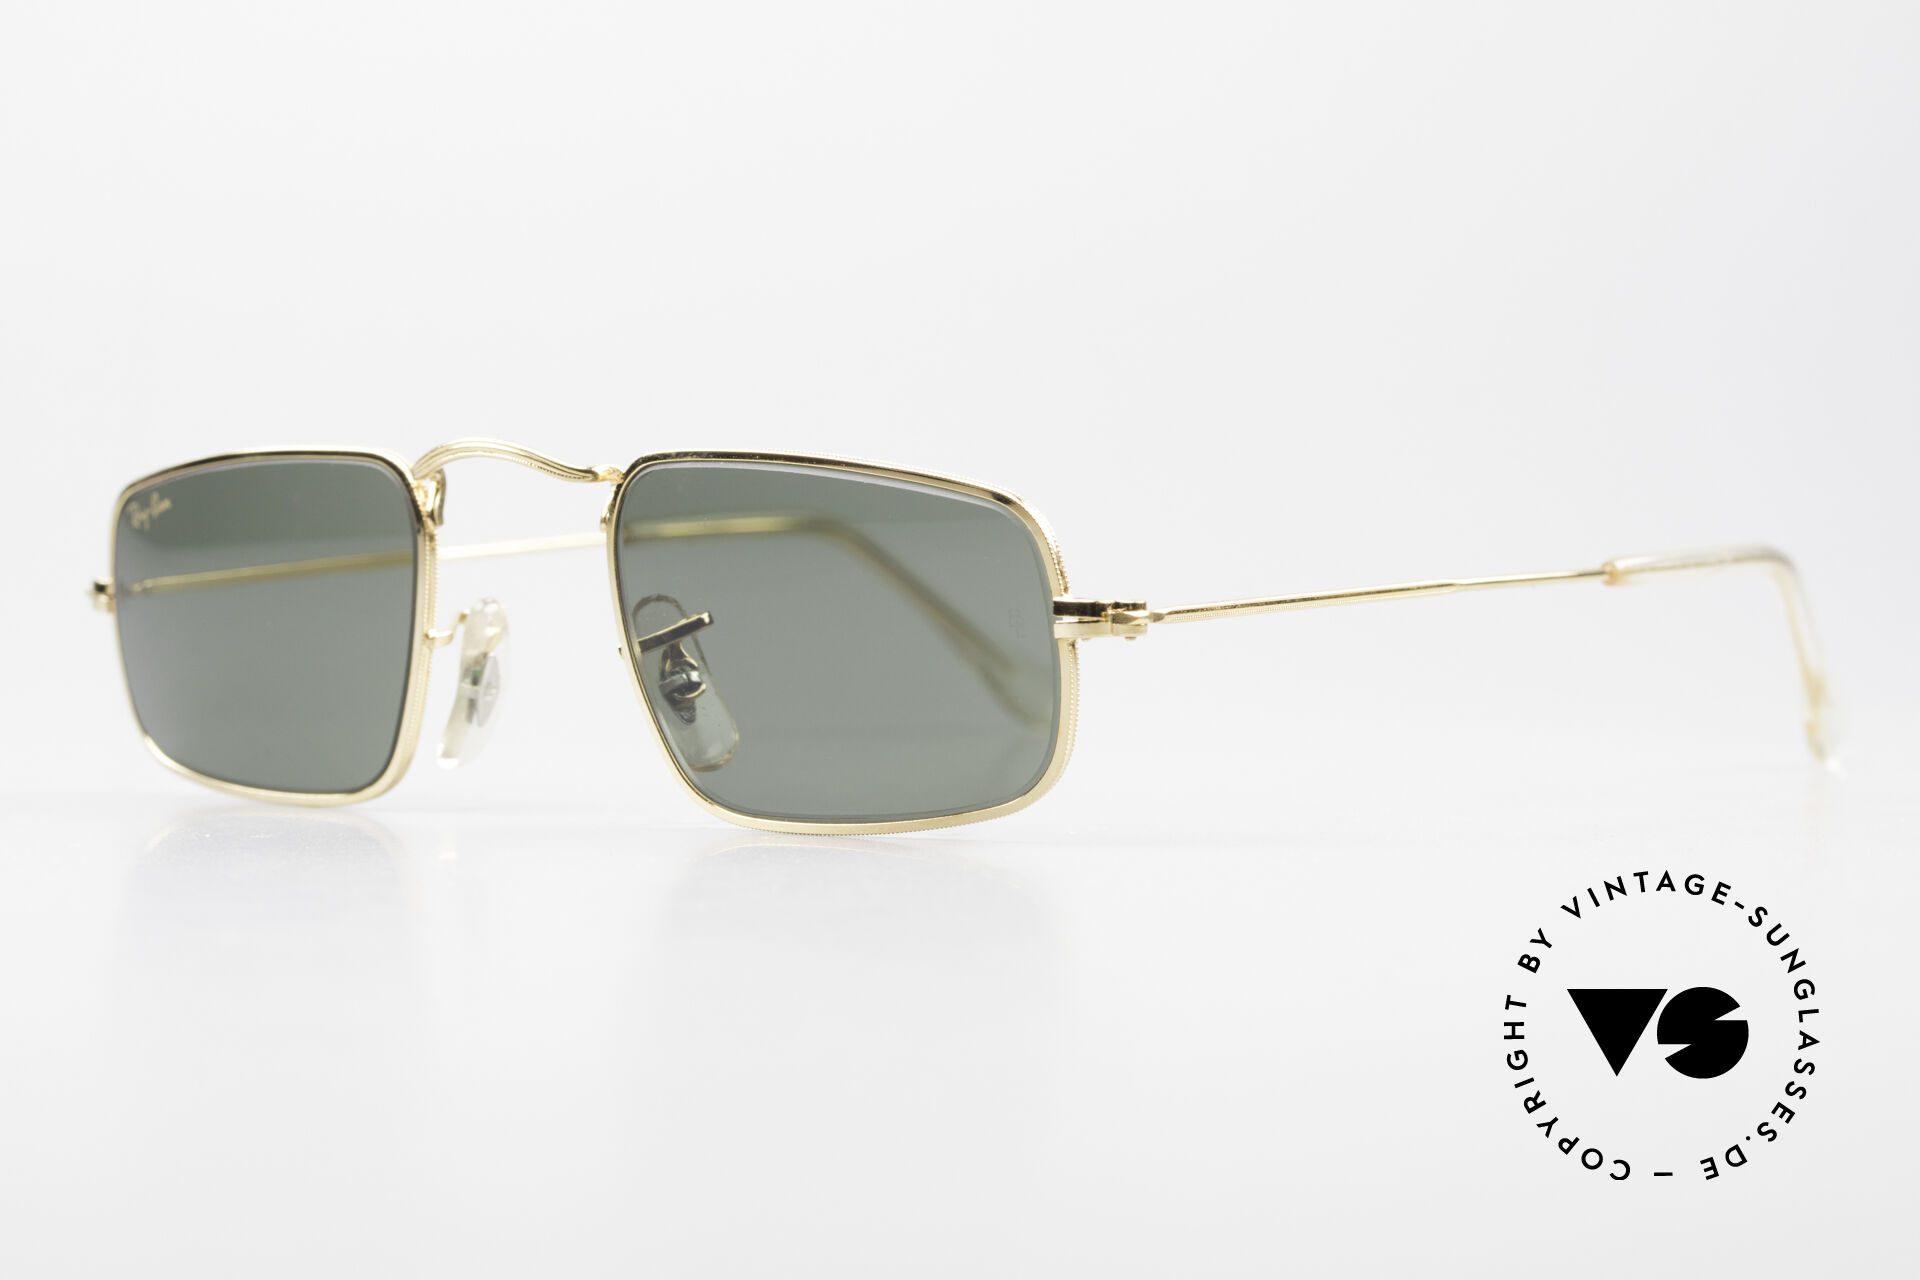 https://www.vintage-sunglasses.de/media/products6/full/17883_43673_Ray-Ban-Classic-Style-IV_Square-Frame-Small-BandL-USA_Men_Women_Square_Classic_Sunglasses.jpg